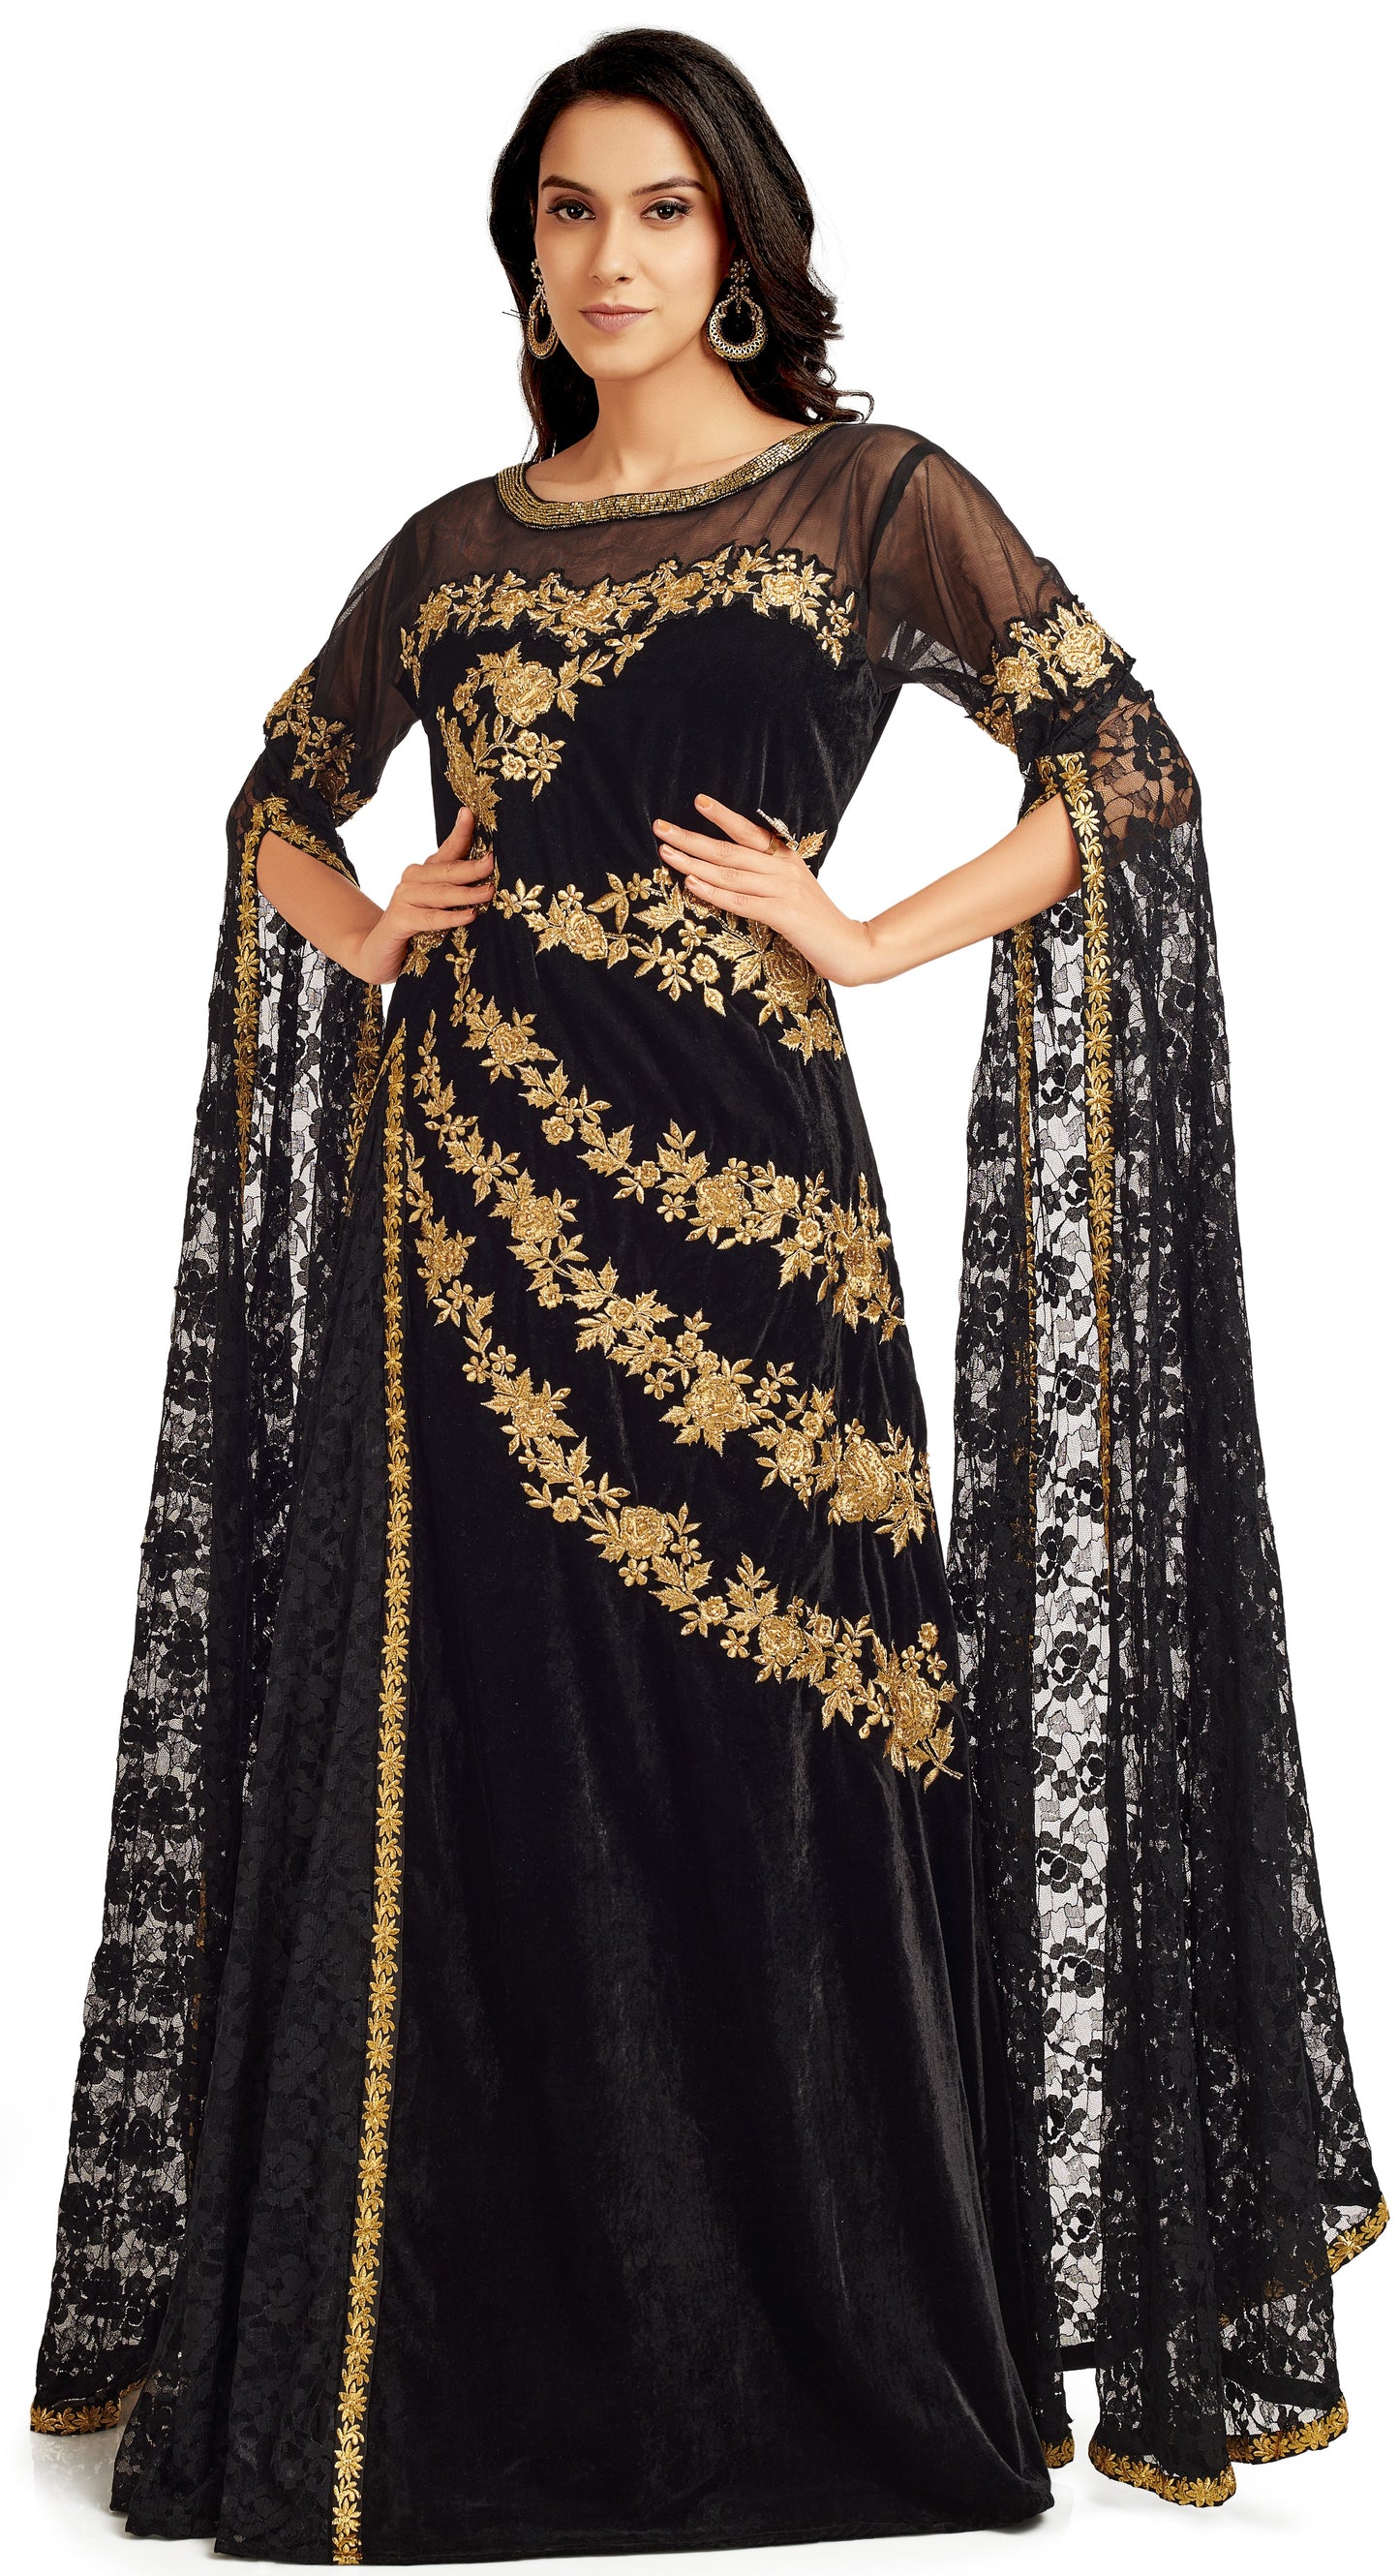 Black Velvet Party Gown with Long Sleeve - Maxim Creation